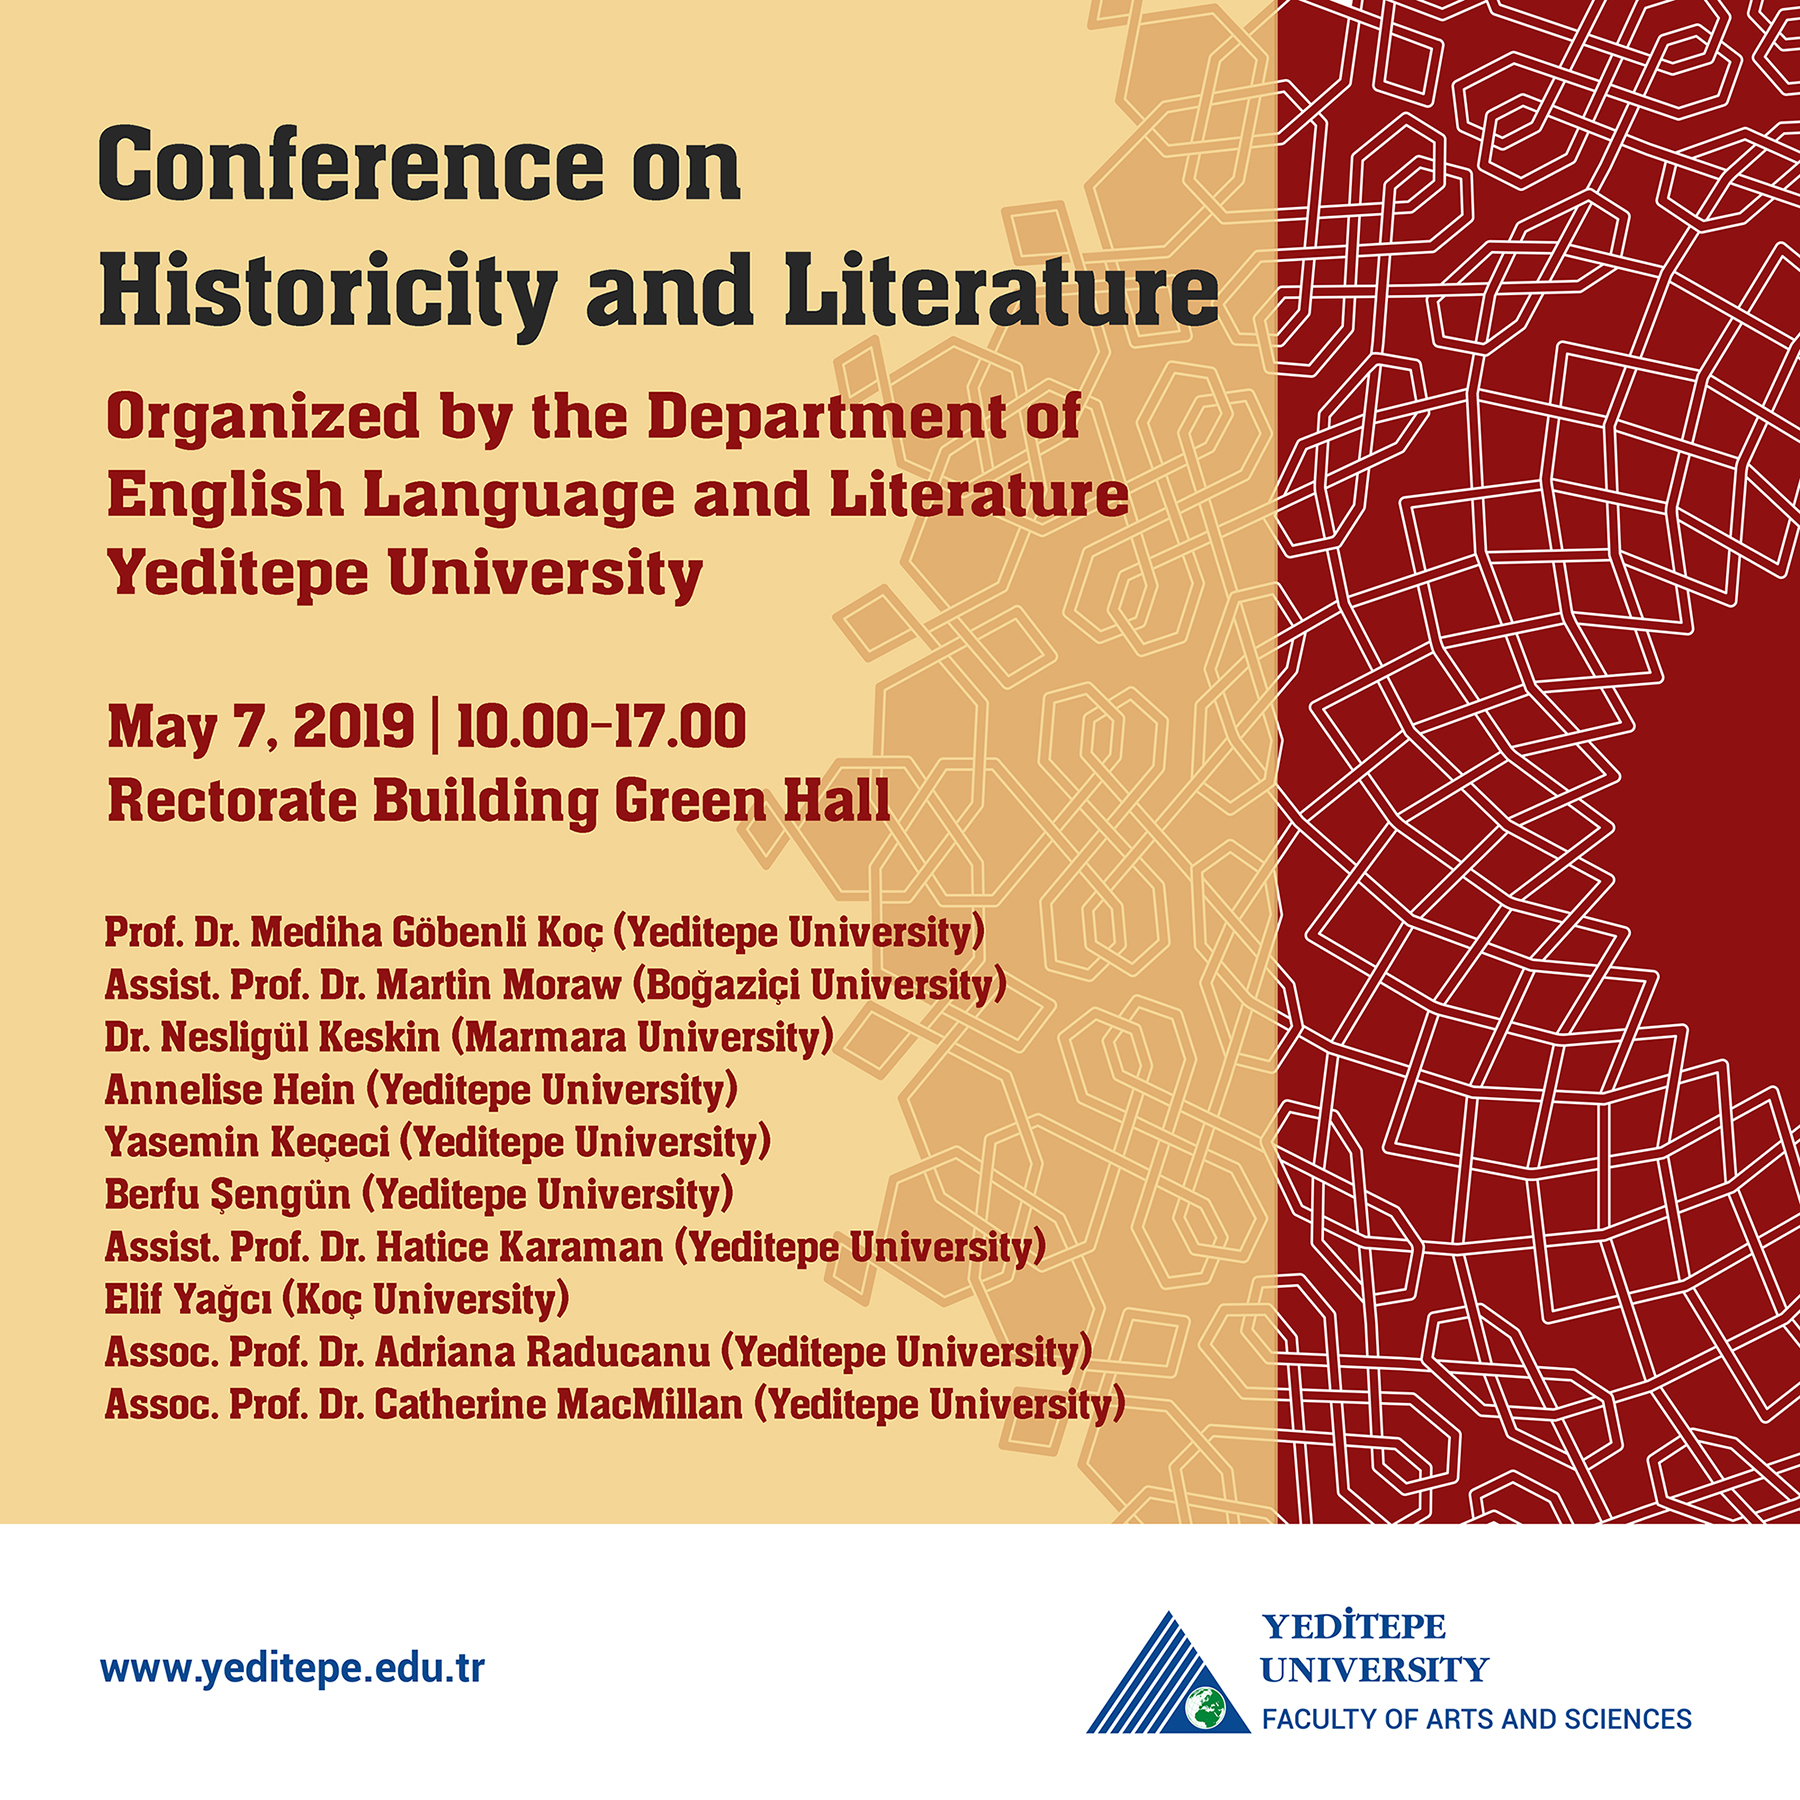 Faculty of Arts and Sciences - Conference of Historicity and Literature